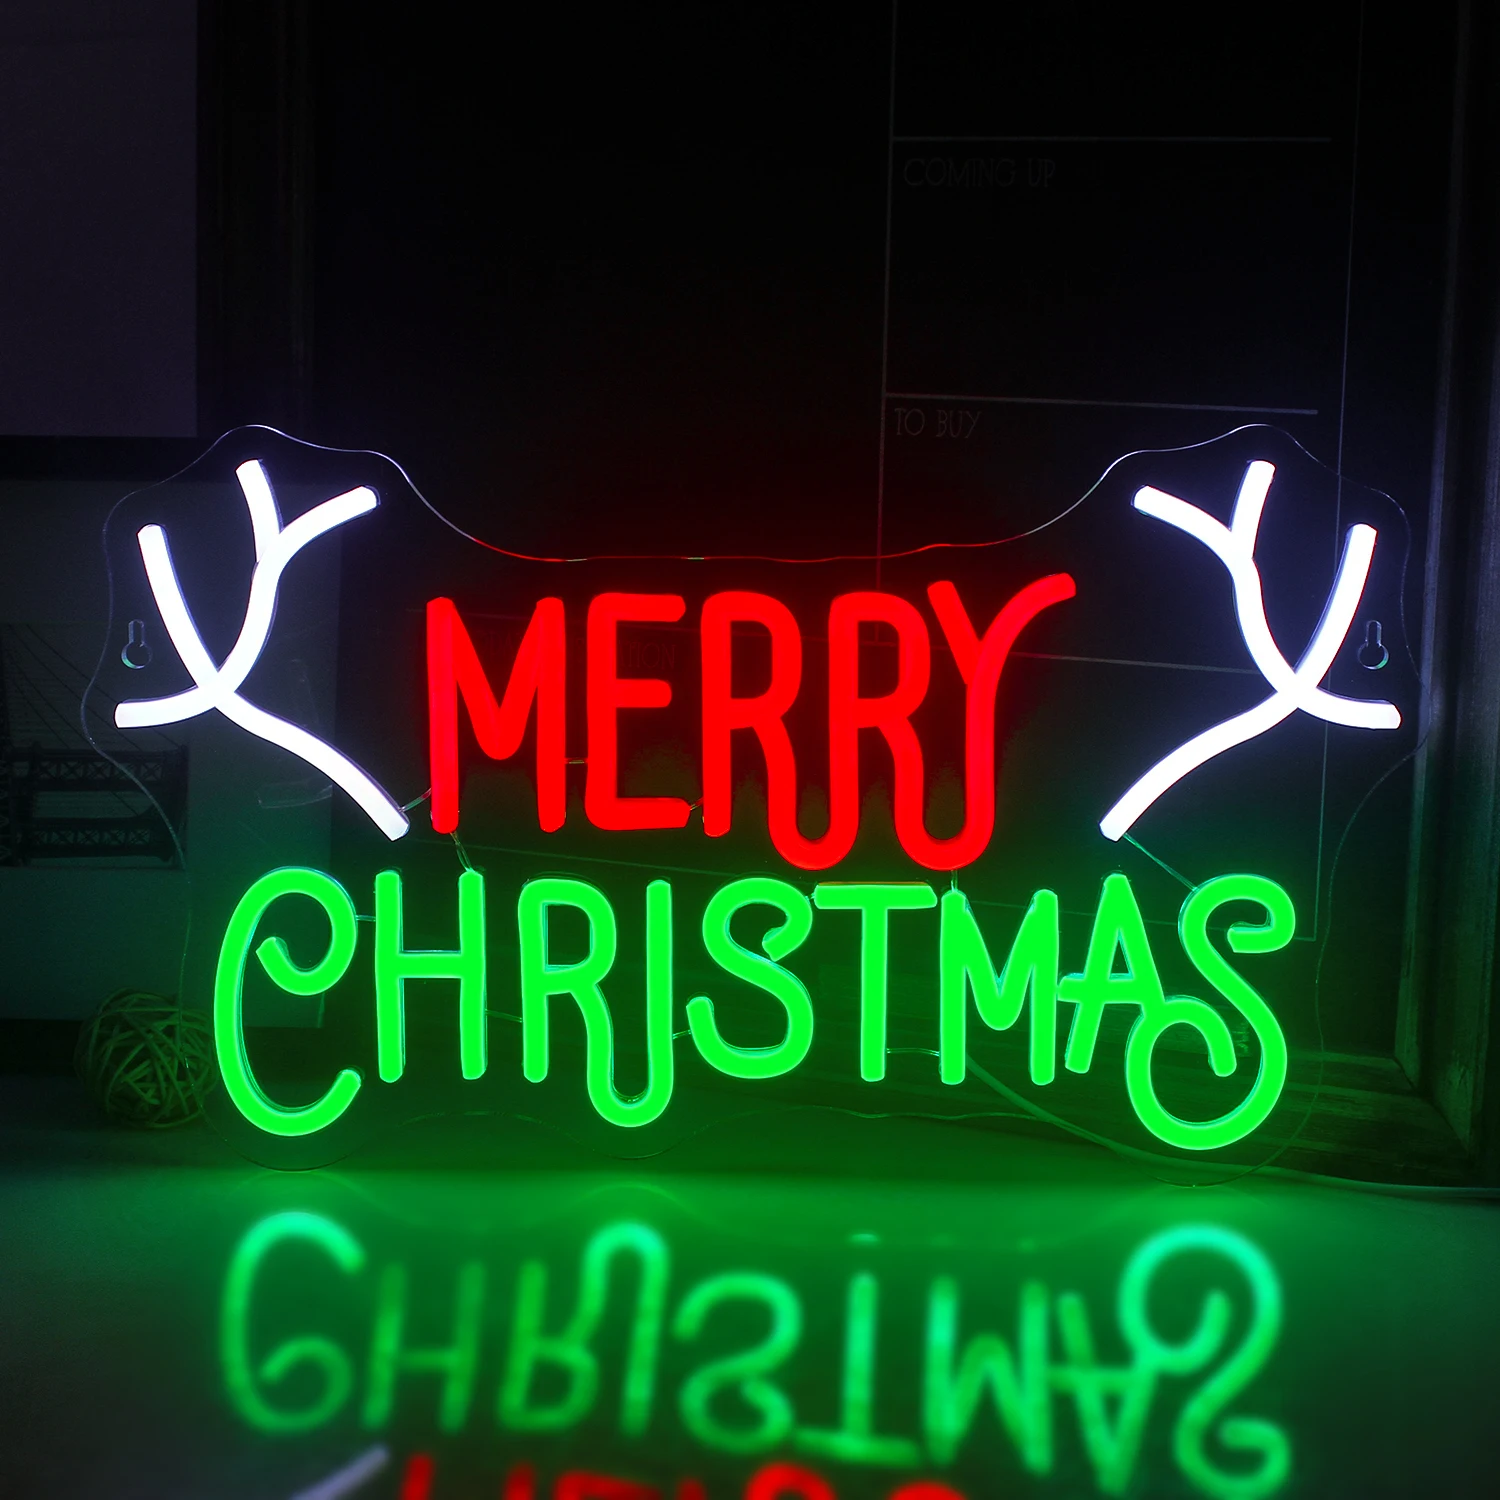 Merry Christmas Neon Sign Led Neon Wall Light Acrylic Board for Christmas Party Supplies Bedroom Wedding Bar Pub Club Christmas wedding supplies picture cards display stand table numbers holder clamps stand acrylic sign holder place card